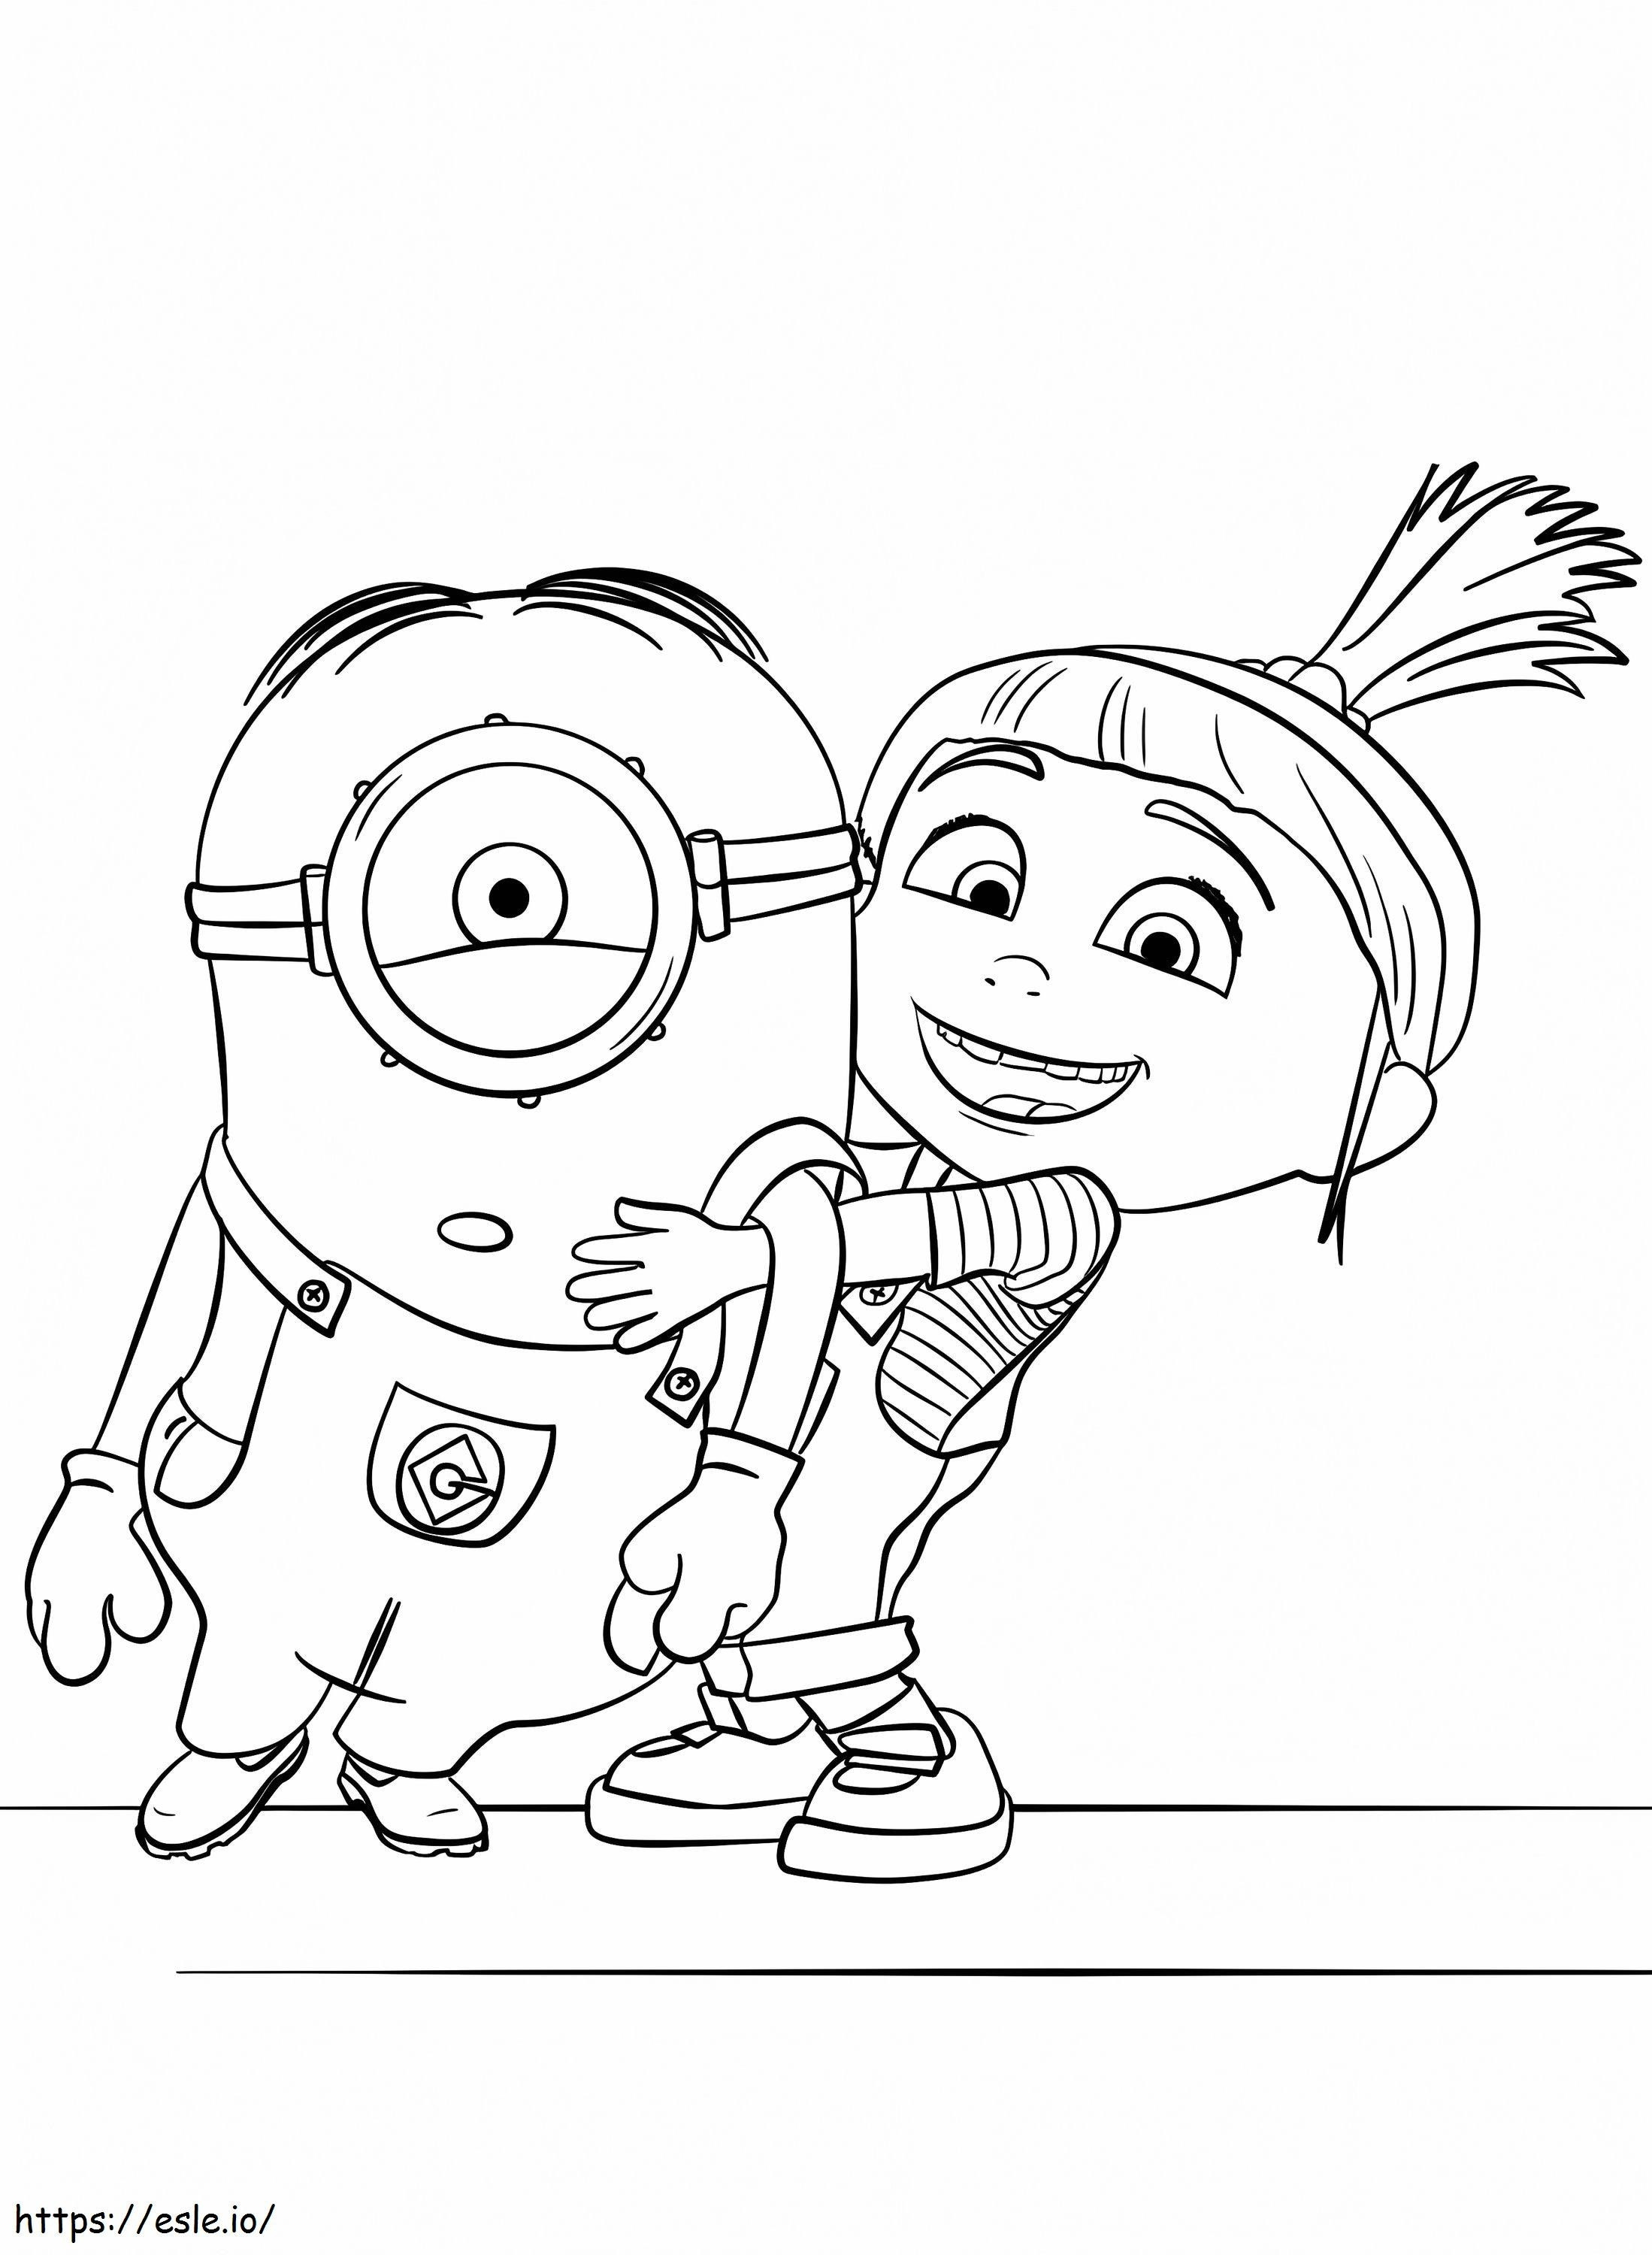 Agnes Gru And Minion coloring page